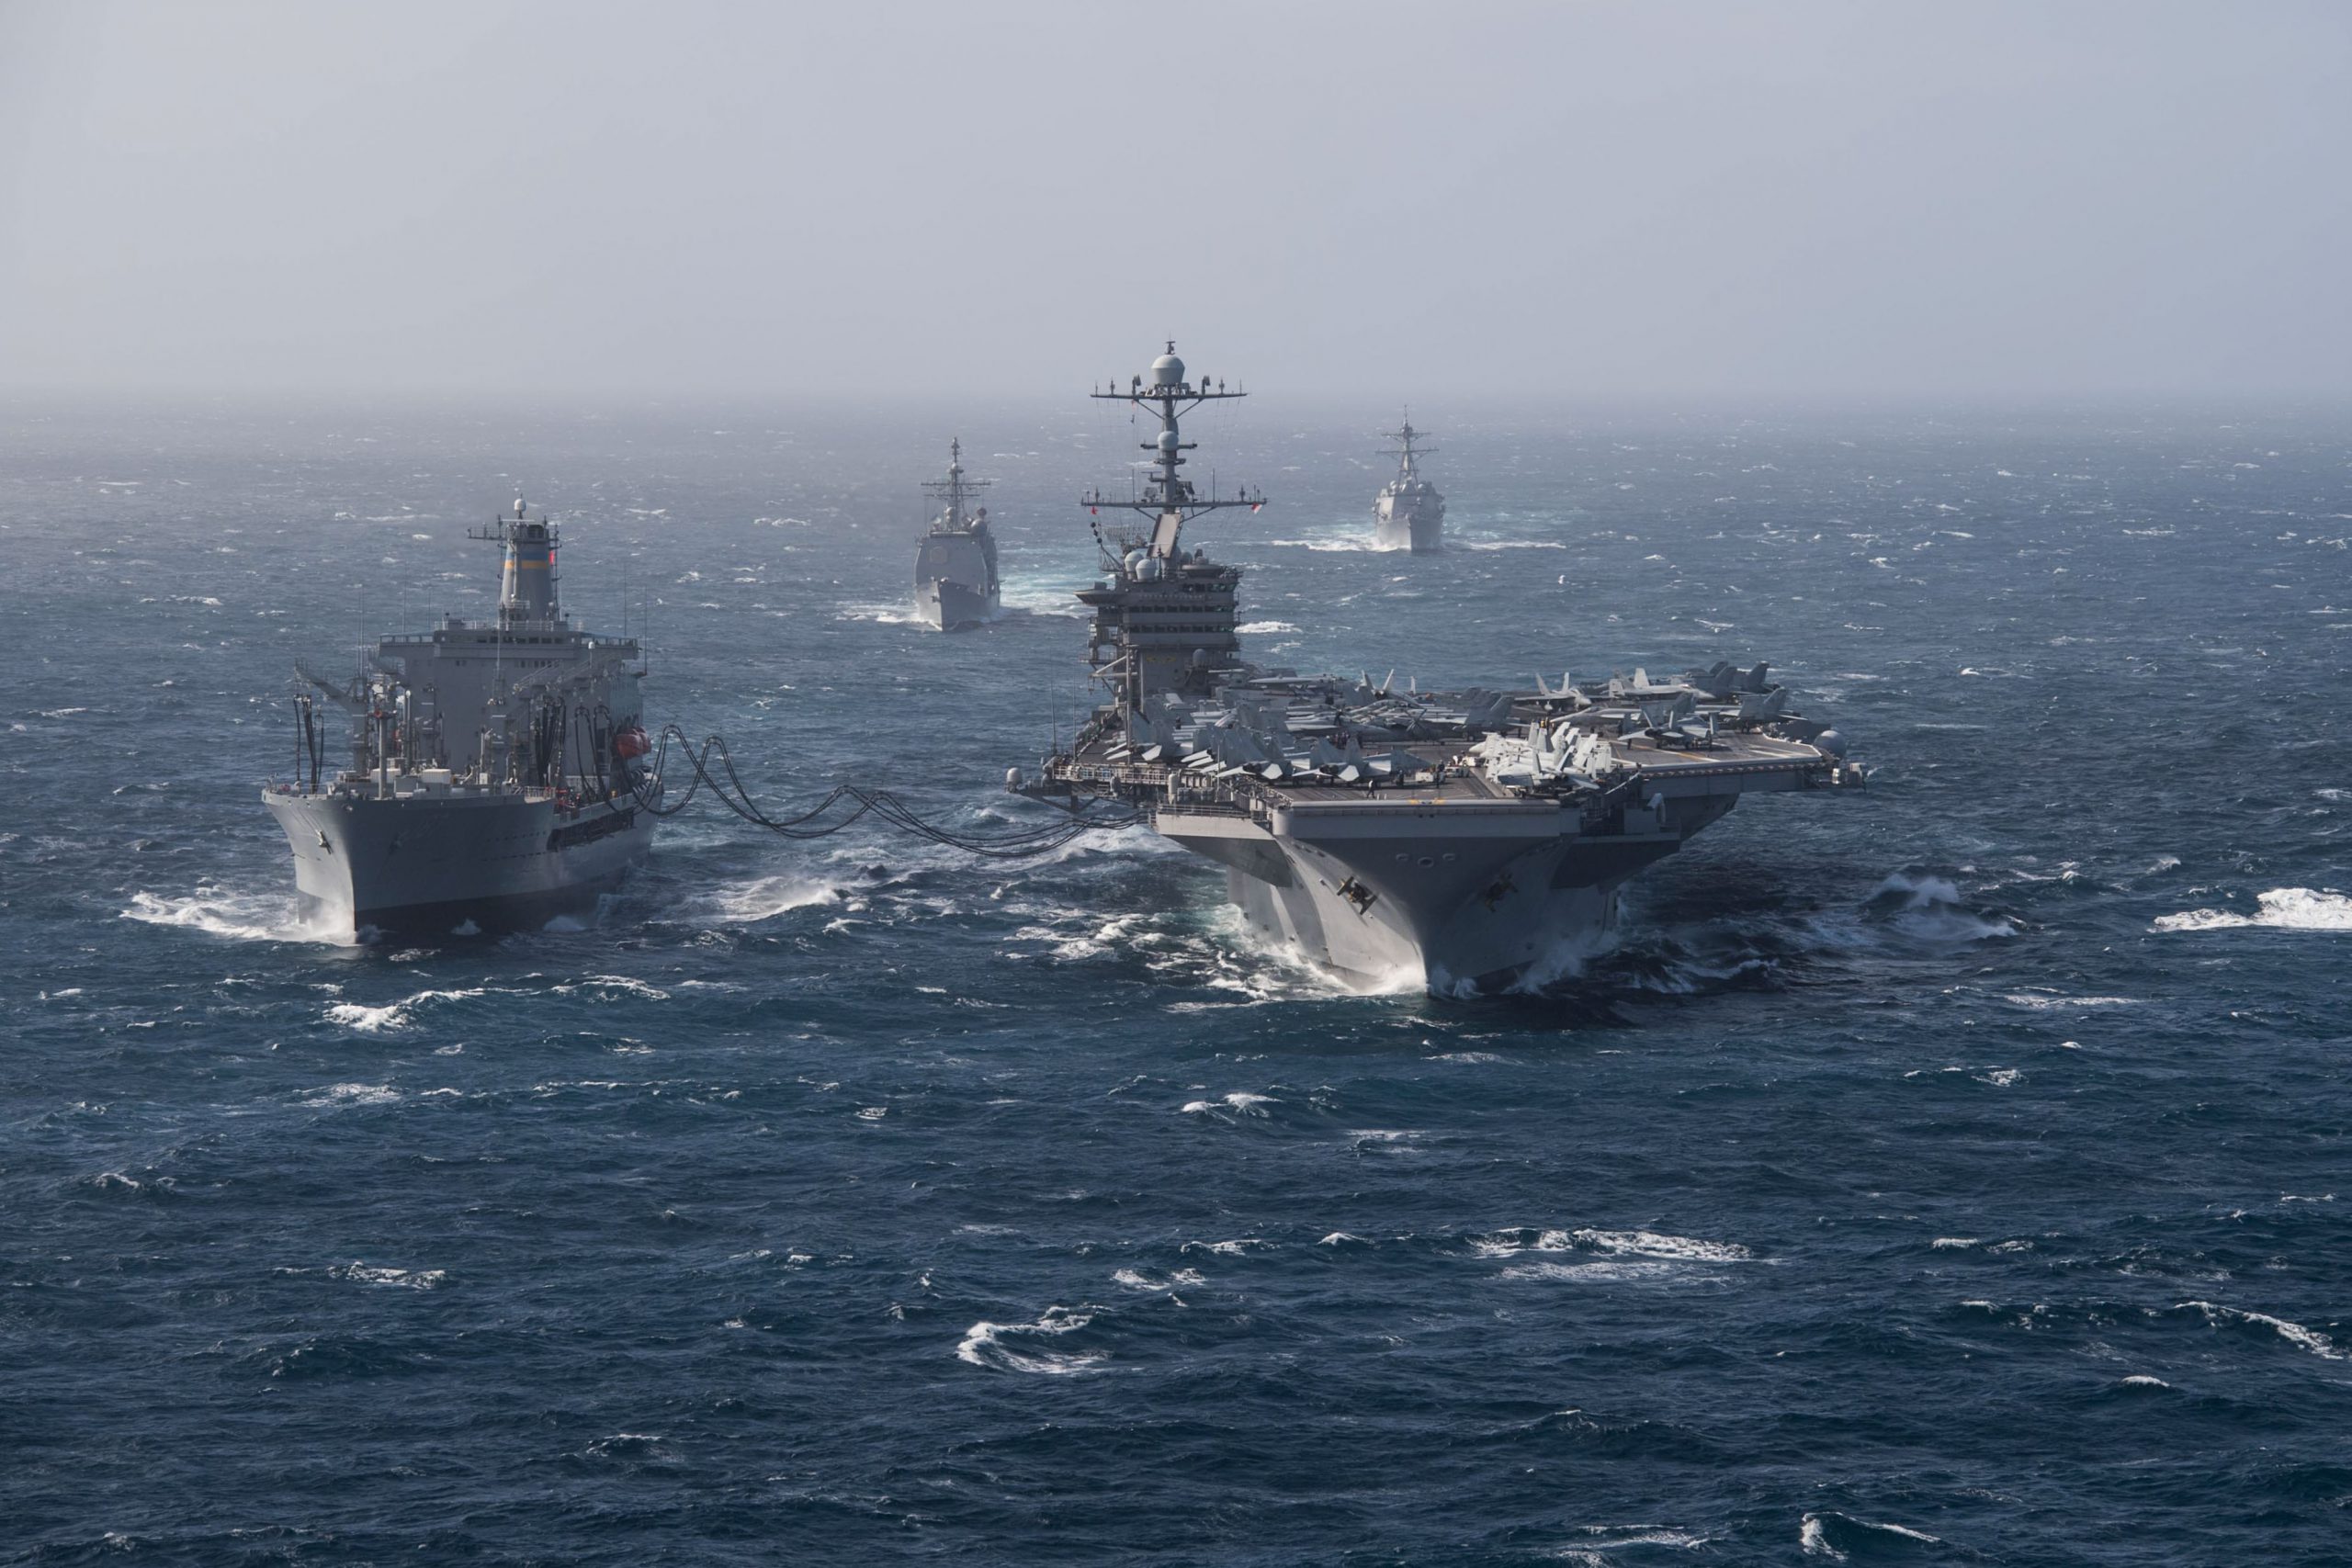 PACIFIC OCEAN (May 10, 2018) The aircraft carrier USS John C. Stennis (CVN 74), right, conducts a replenishment-at-sea with the fleet replenishment oiler USNS Henry J. Kaiser (T-AO 187). John C. Stennis is underway with the ships and squadrons of Carrier Strike Group (CSG) 3 conducting a group sail training in preparation for its next scheduled deployment. U.S. Navy photo by Mass Communication Specialist 2nd Class David A. Brandenburg. -